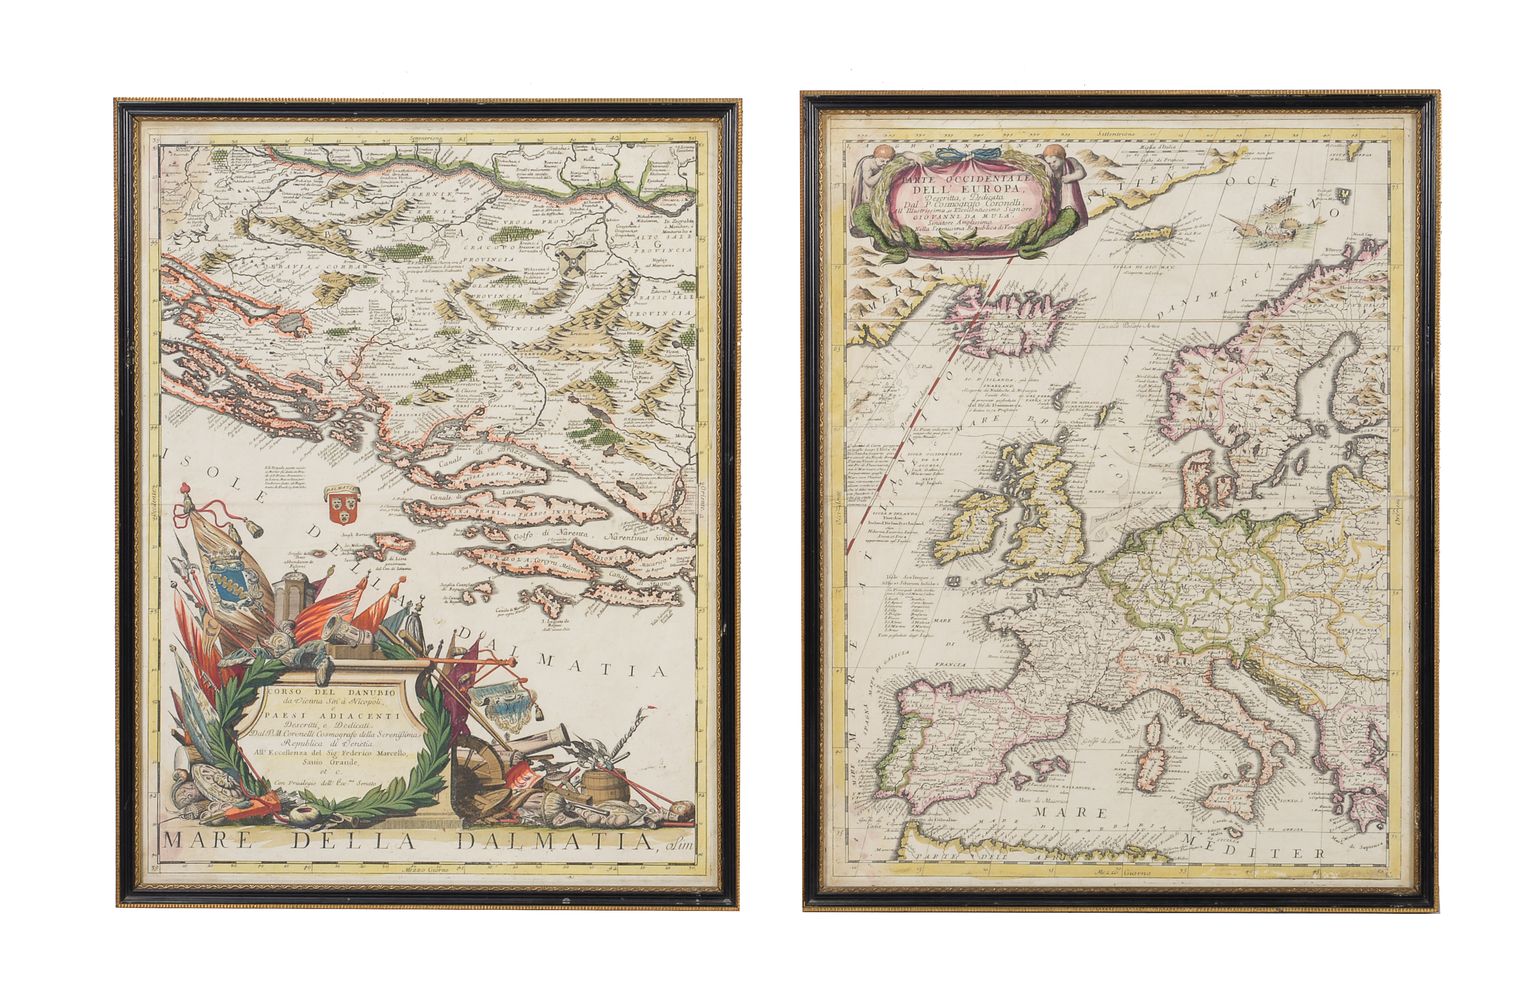 A group of seven maps